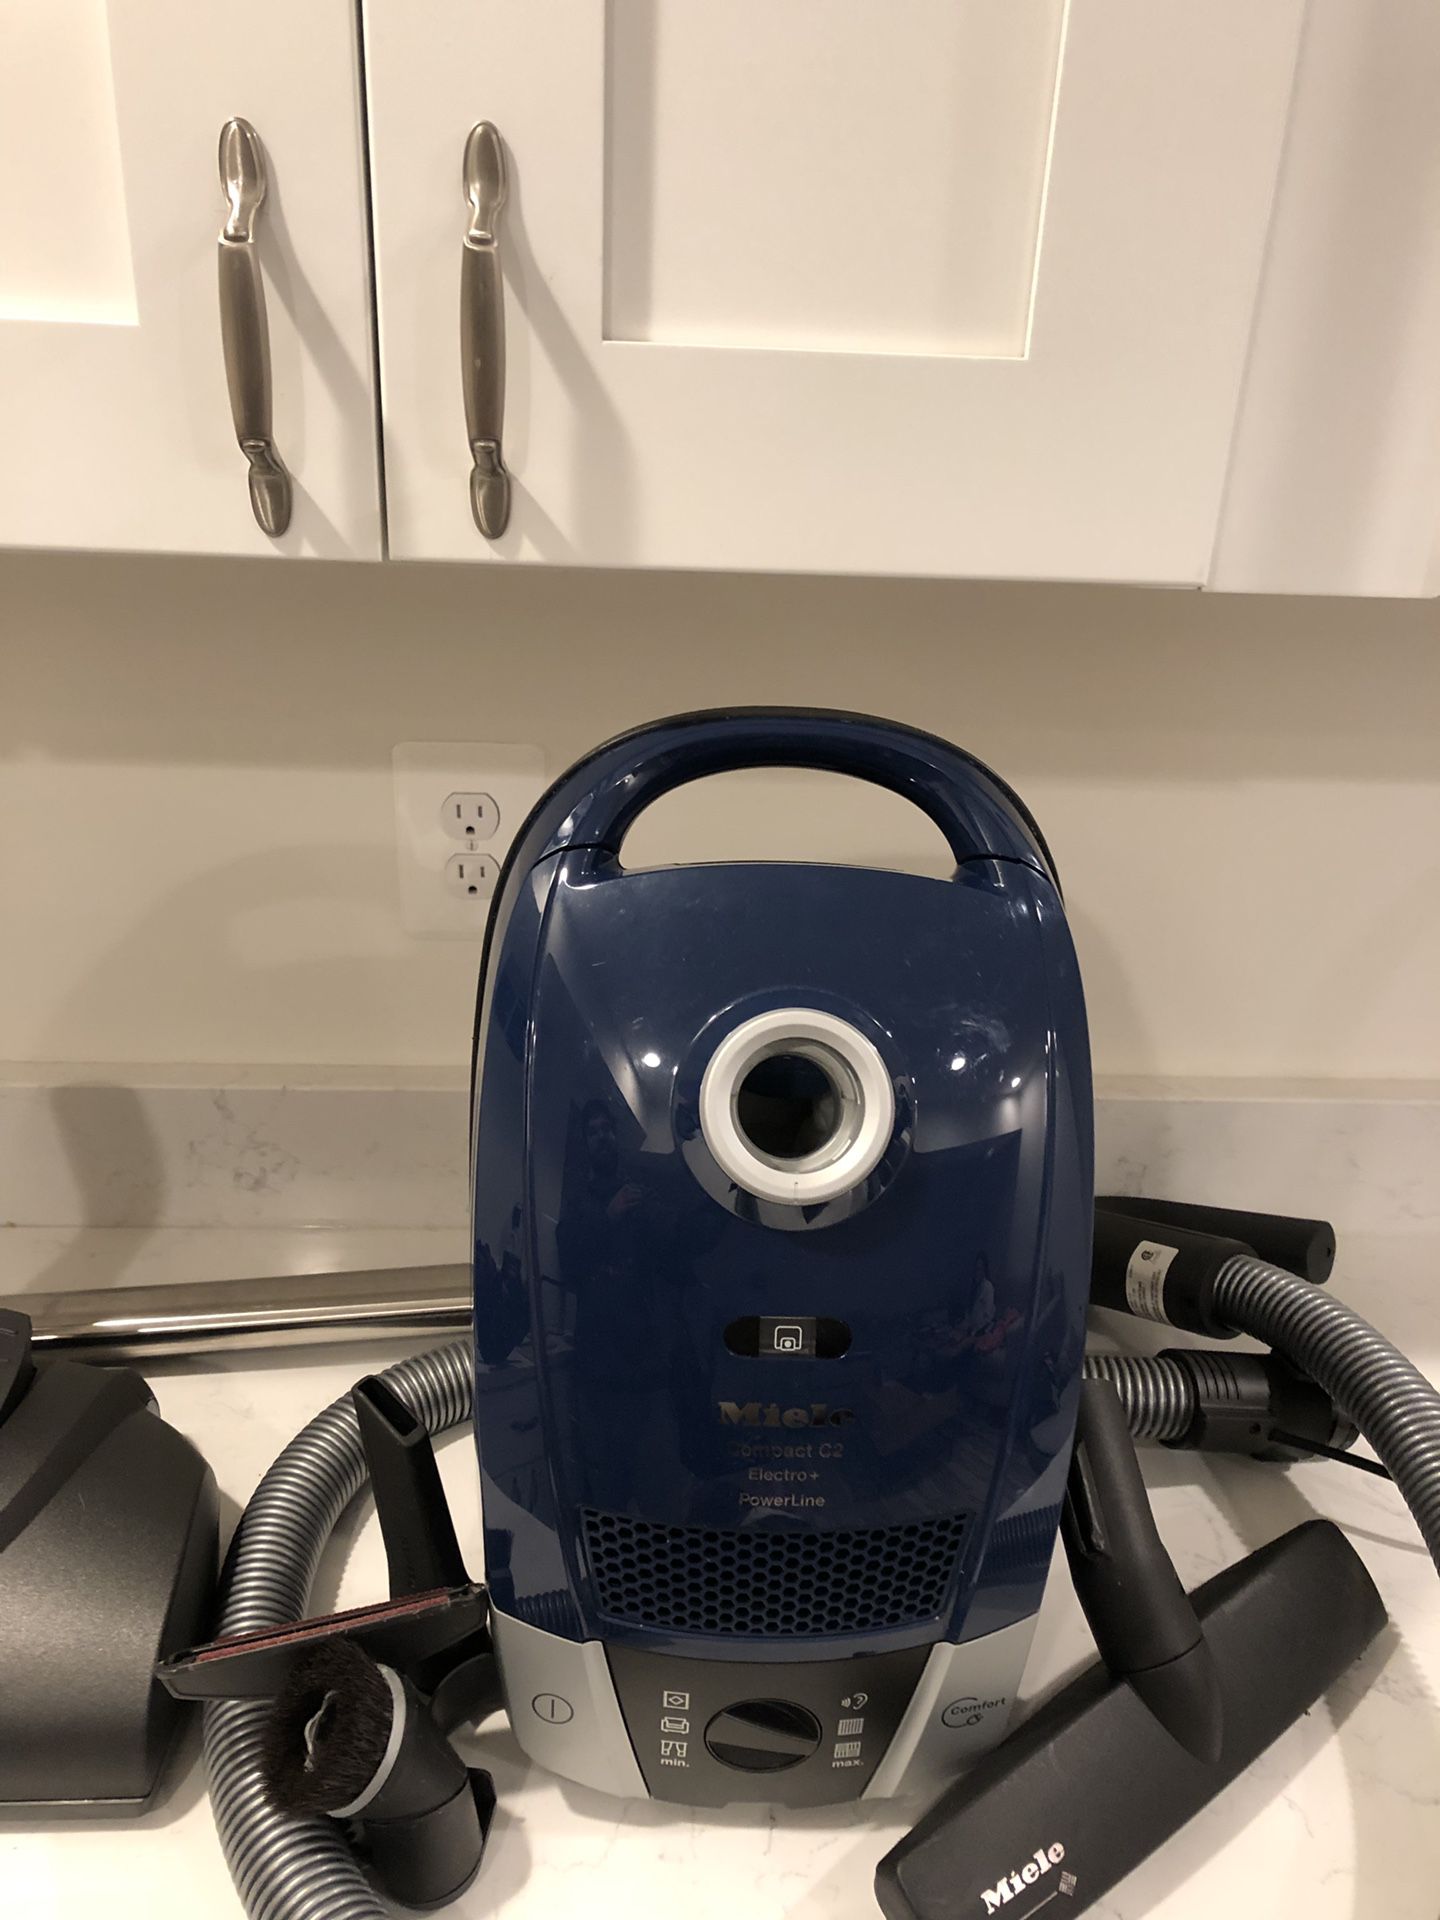 Miele Compact C2 Electro+ Canister Vacuum